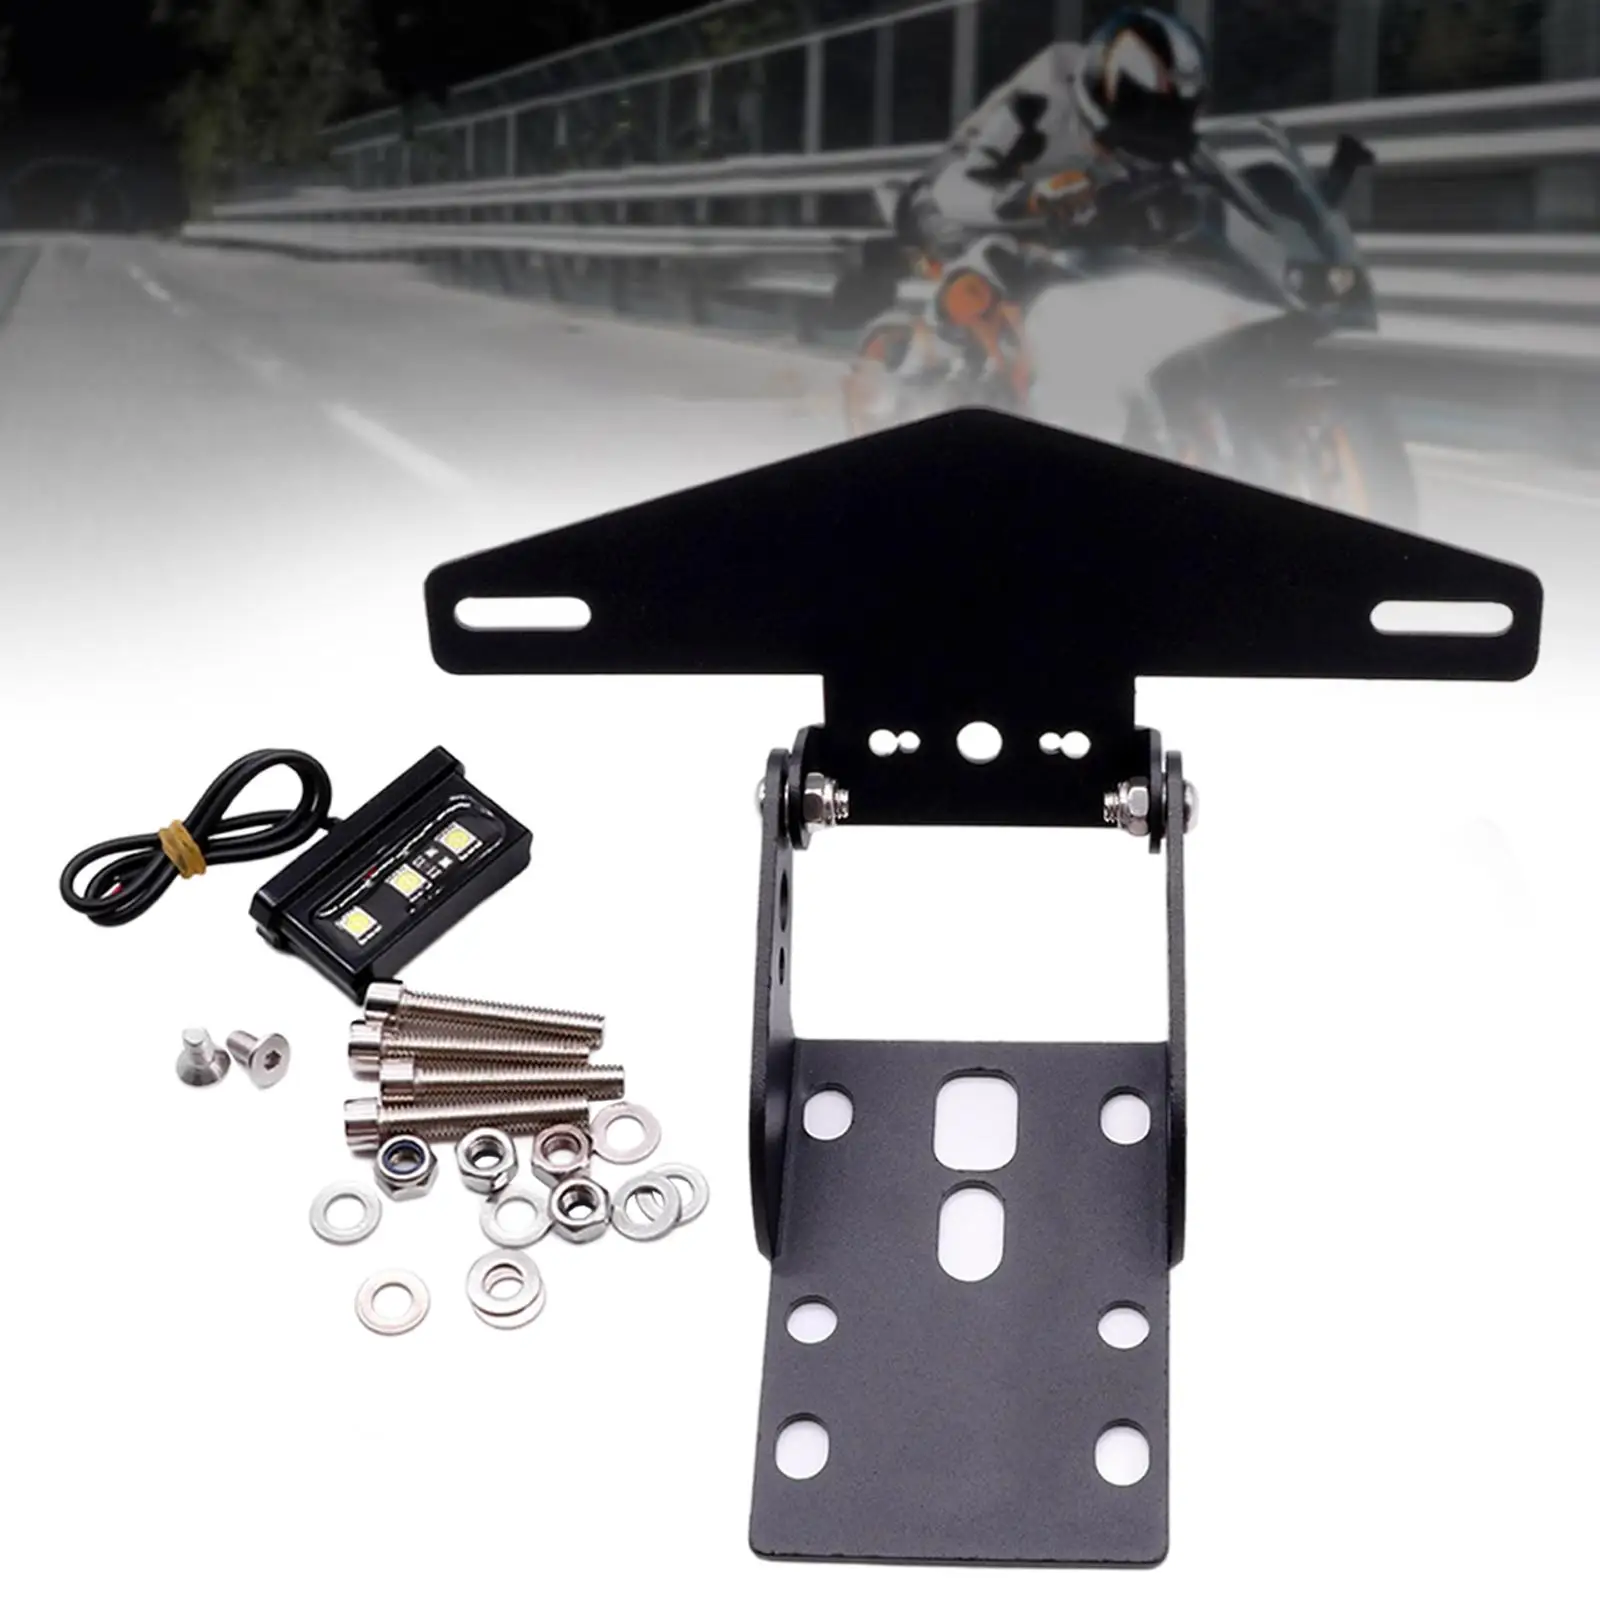 License Number Plate Holder Tail Tidy Adjustable Angle Rear Frame Bracket for 125 200 250 390 2017-2021 with LED Light Parts